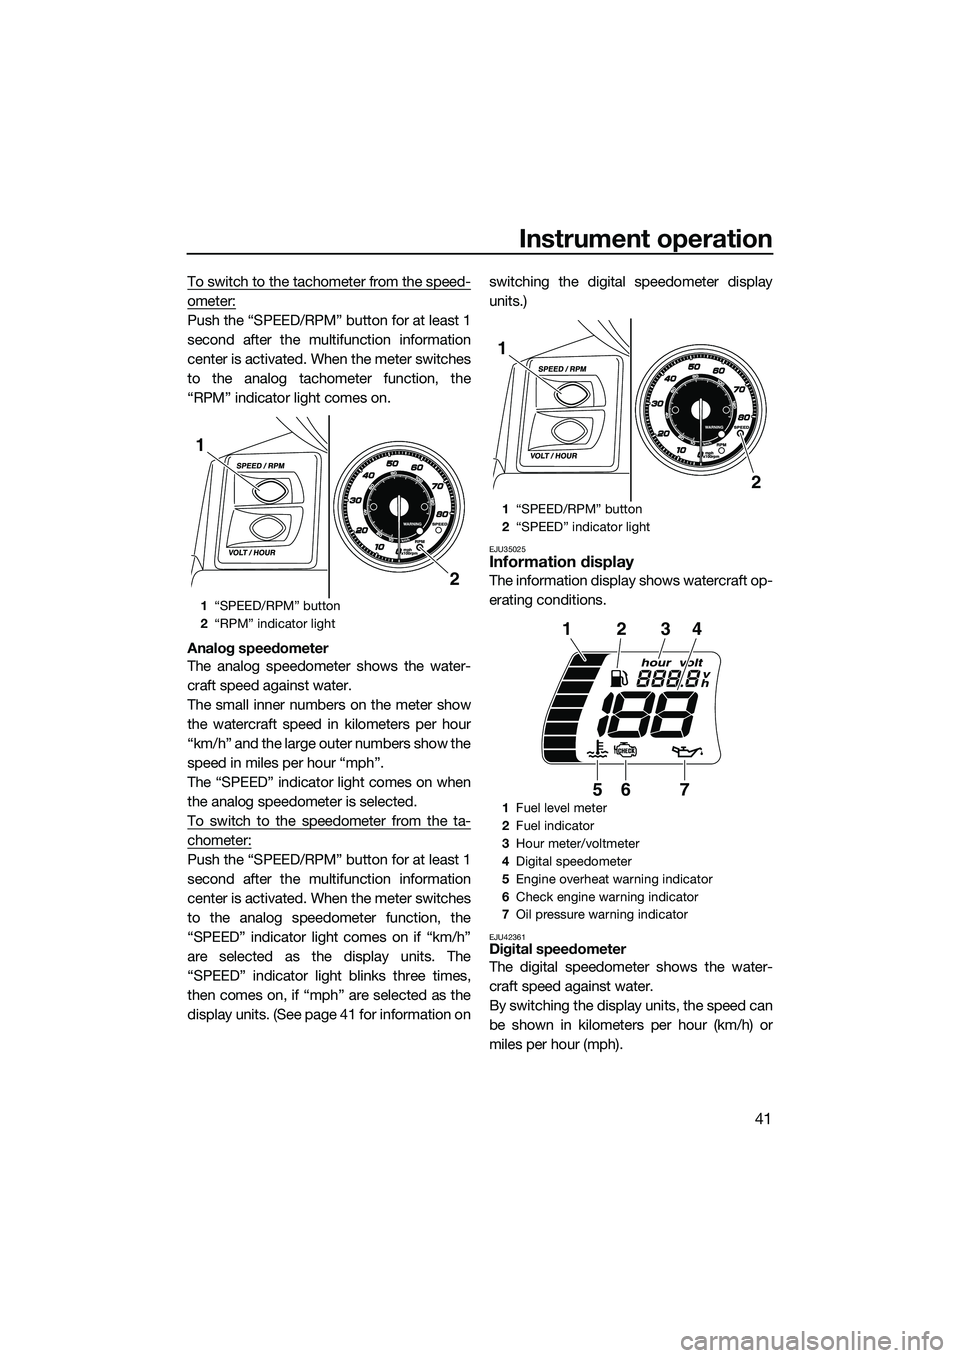 YAMAHA FX SVHO 2015  Owners Manual Instrument operation
41
To switch to the tachometer from the speed-
ometer:
Push the “SPEED/RPM” button for at least 1
second after the multifunction information
center is activated. When the mete